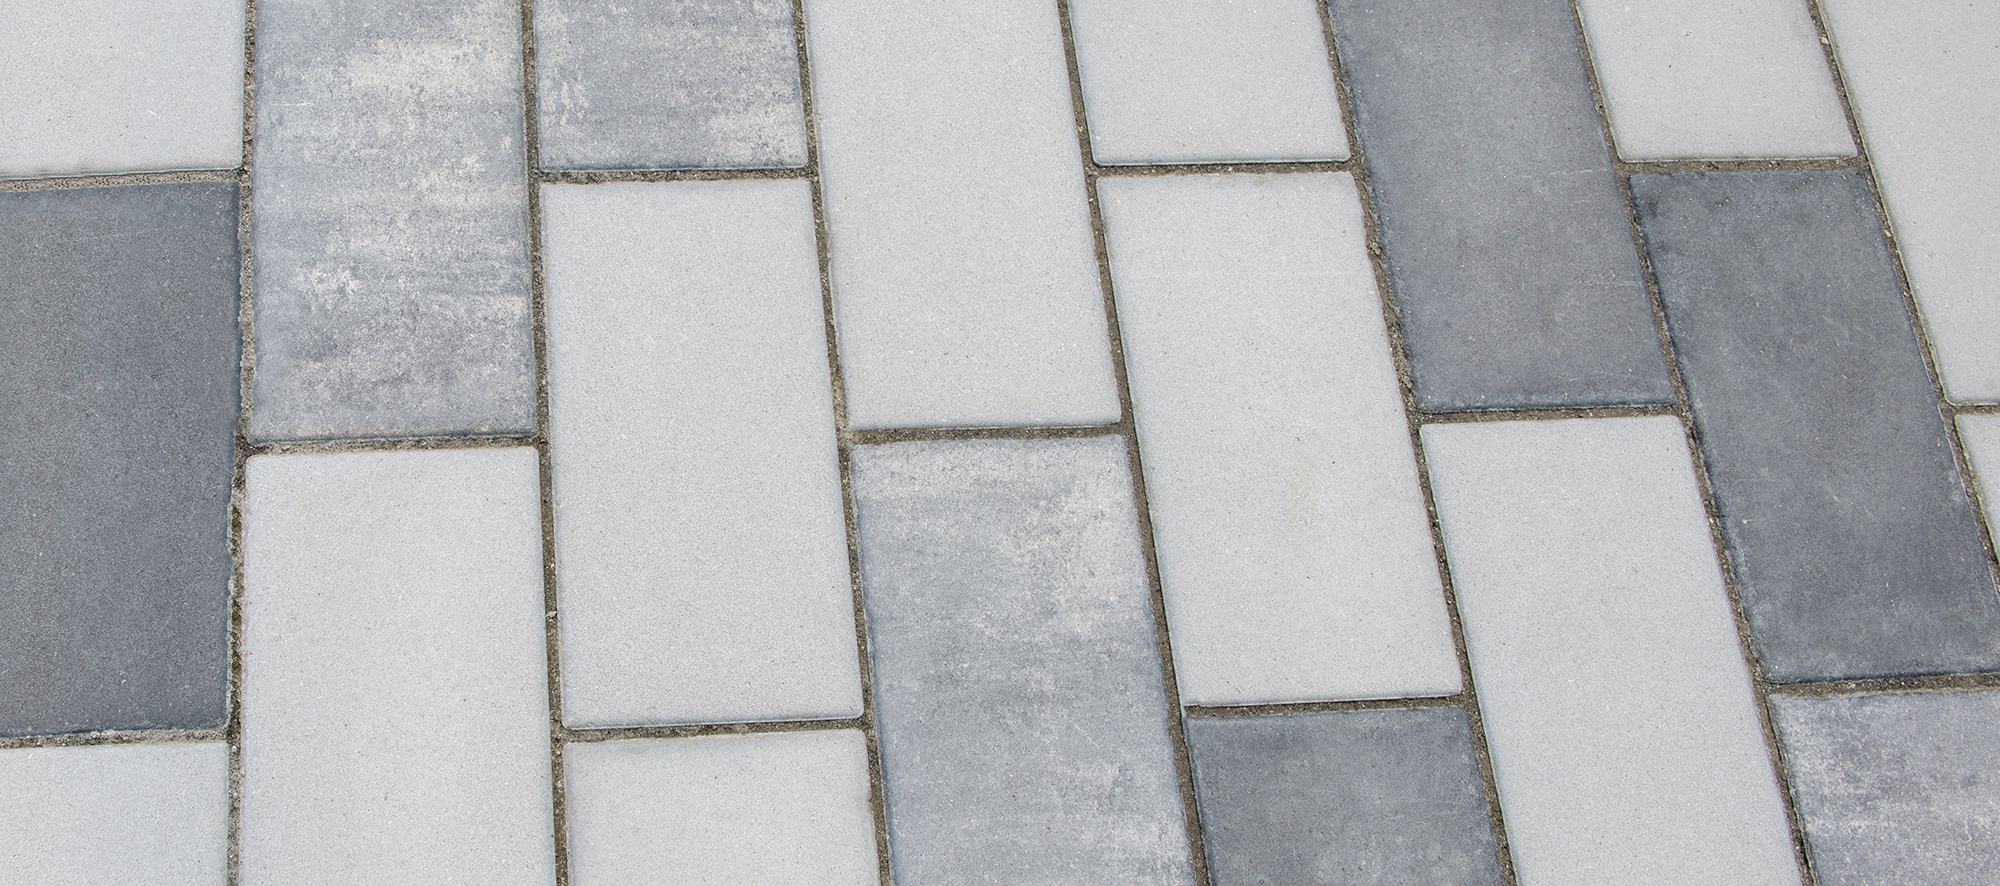 Promenade Plank pavers in three distinct, muted tones create a unique design that is sporadic in appearance.